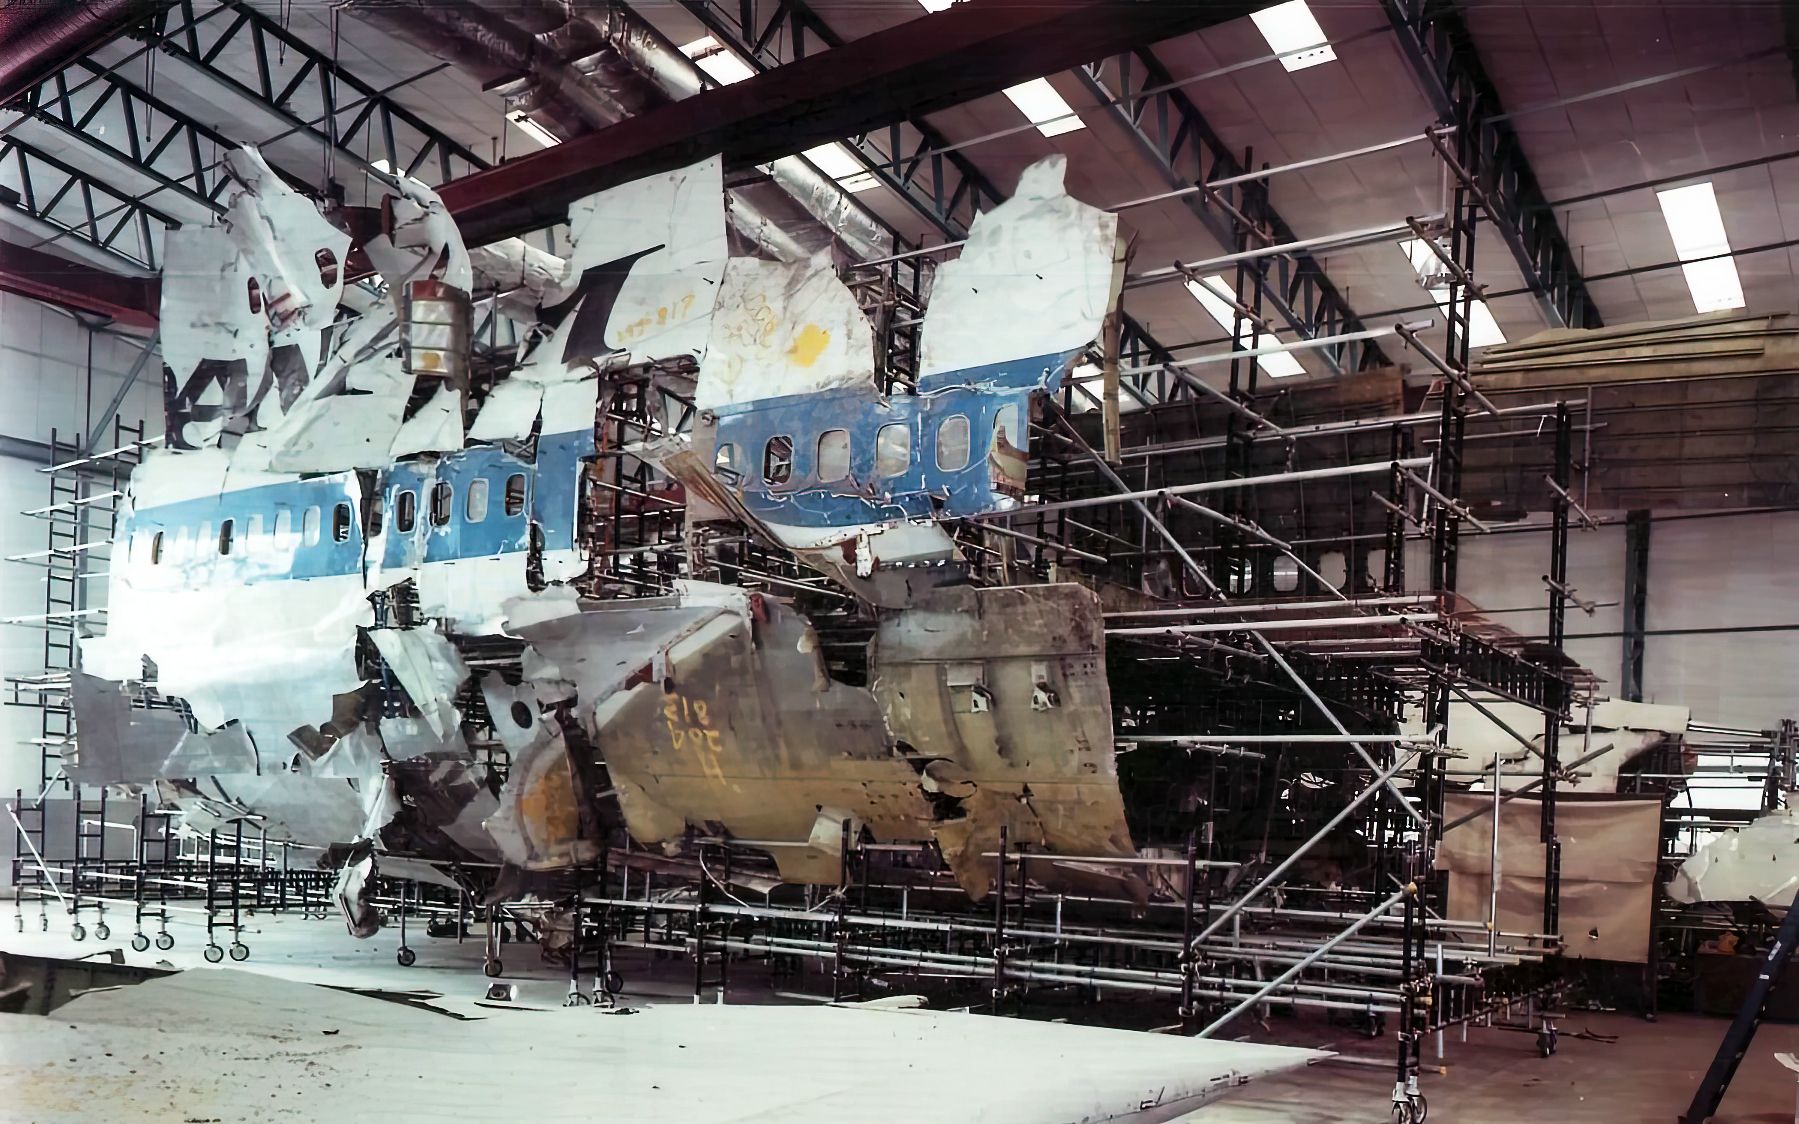 Reconstruction of the wrecked aircraft involved with Pan Am Flight 103.